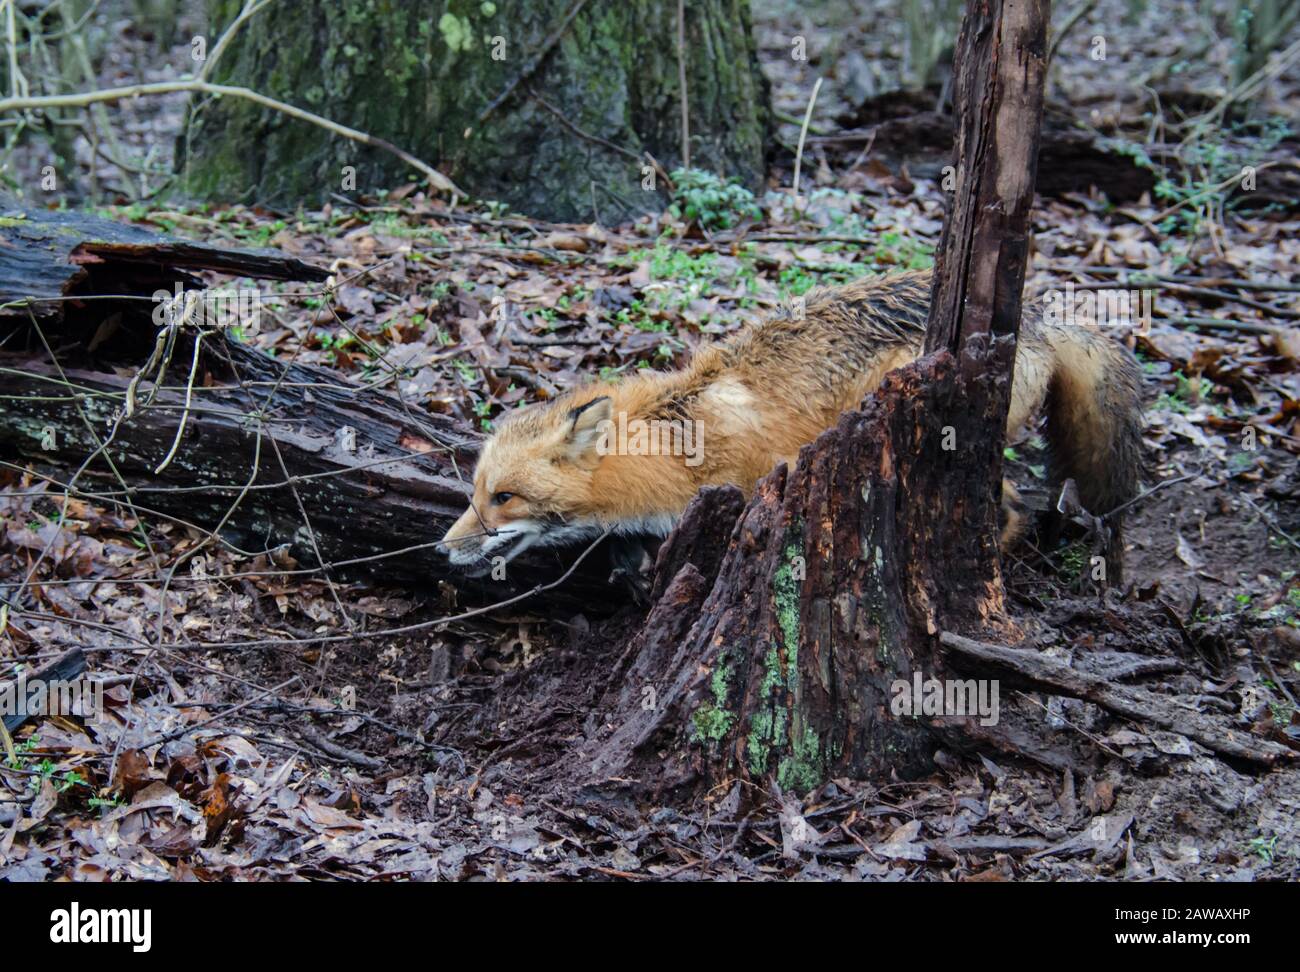 Red fox canine caught by trapper in live trap. Wildlife trapped in foothold trap. Management and recreational sport activity of animal trapping. Stock Photo